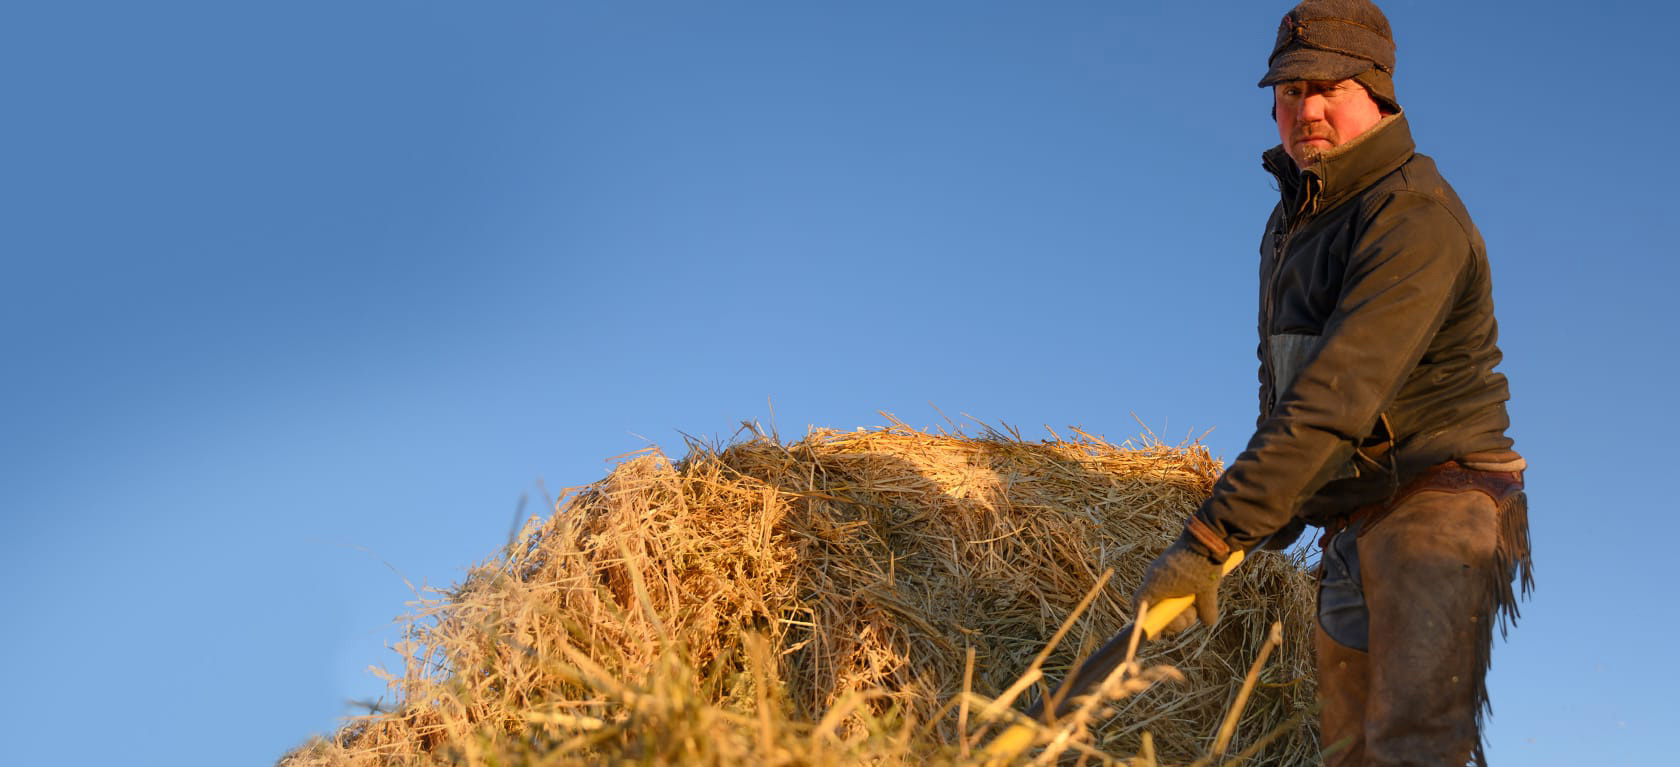 rancher carrying a hay bale